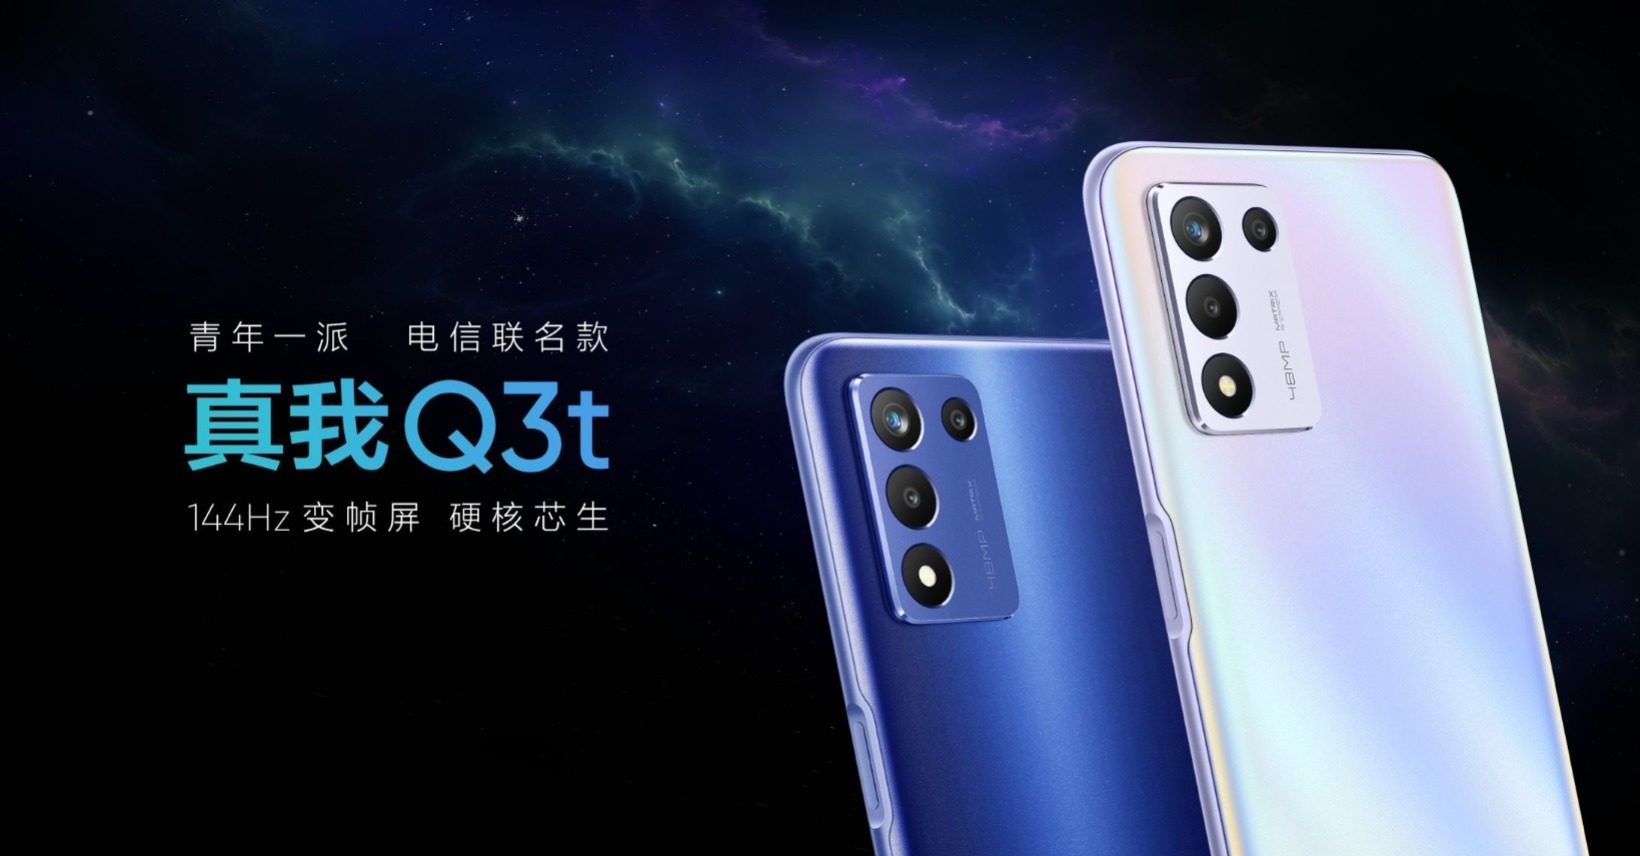 Realme Q3t 5G With Snapdragon 778G 5G Chip Launched: Price, Specifications